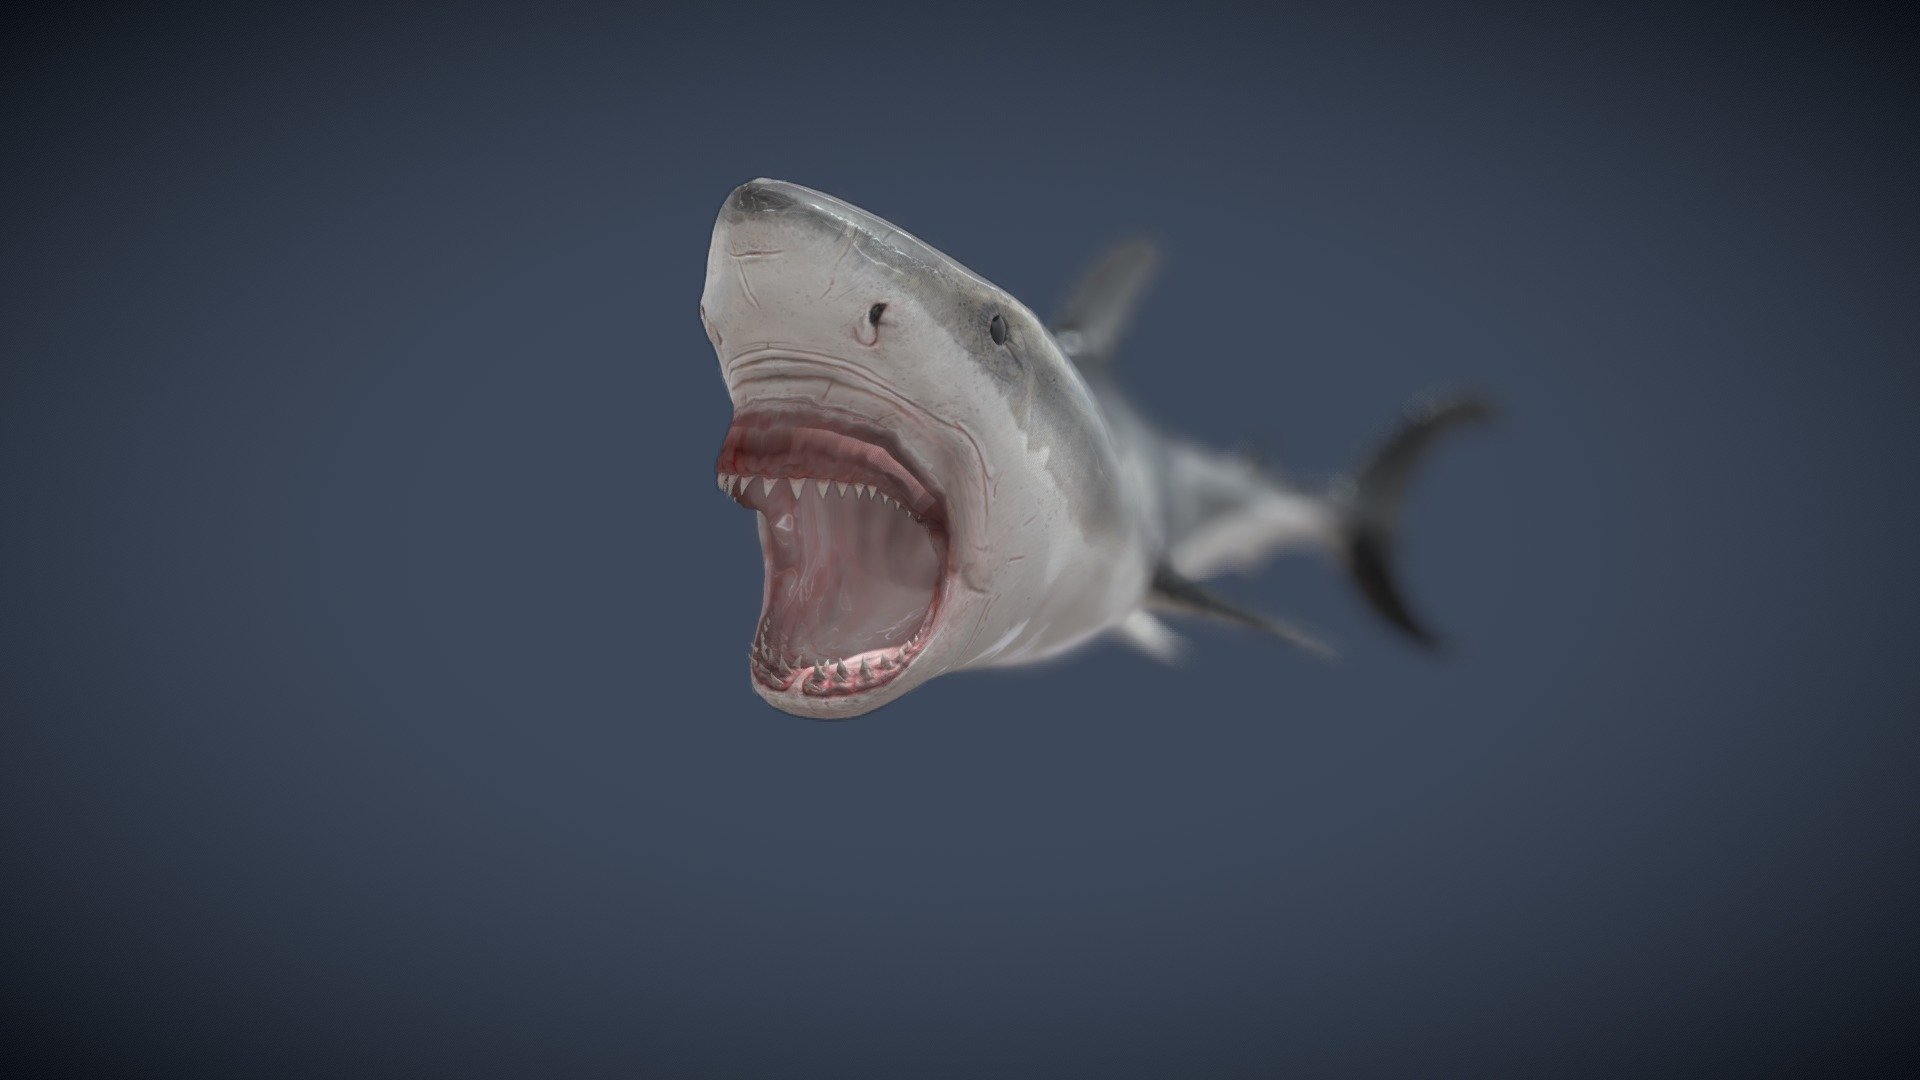 A Great White Shark Attacks and Bites in this Animated Loop.

See this 3D model in action, and more models like it, in this collection of free augmented reality apps:

https://morpheusar.com/ - Great White Shark Attack Bite Animation Loop - Download Free 3D model by LasquetiSpice 3d model